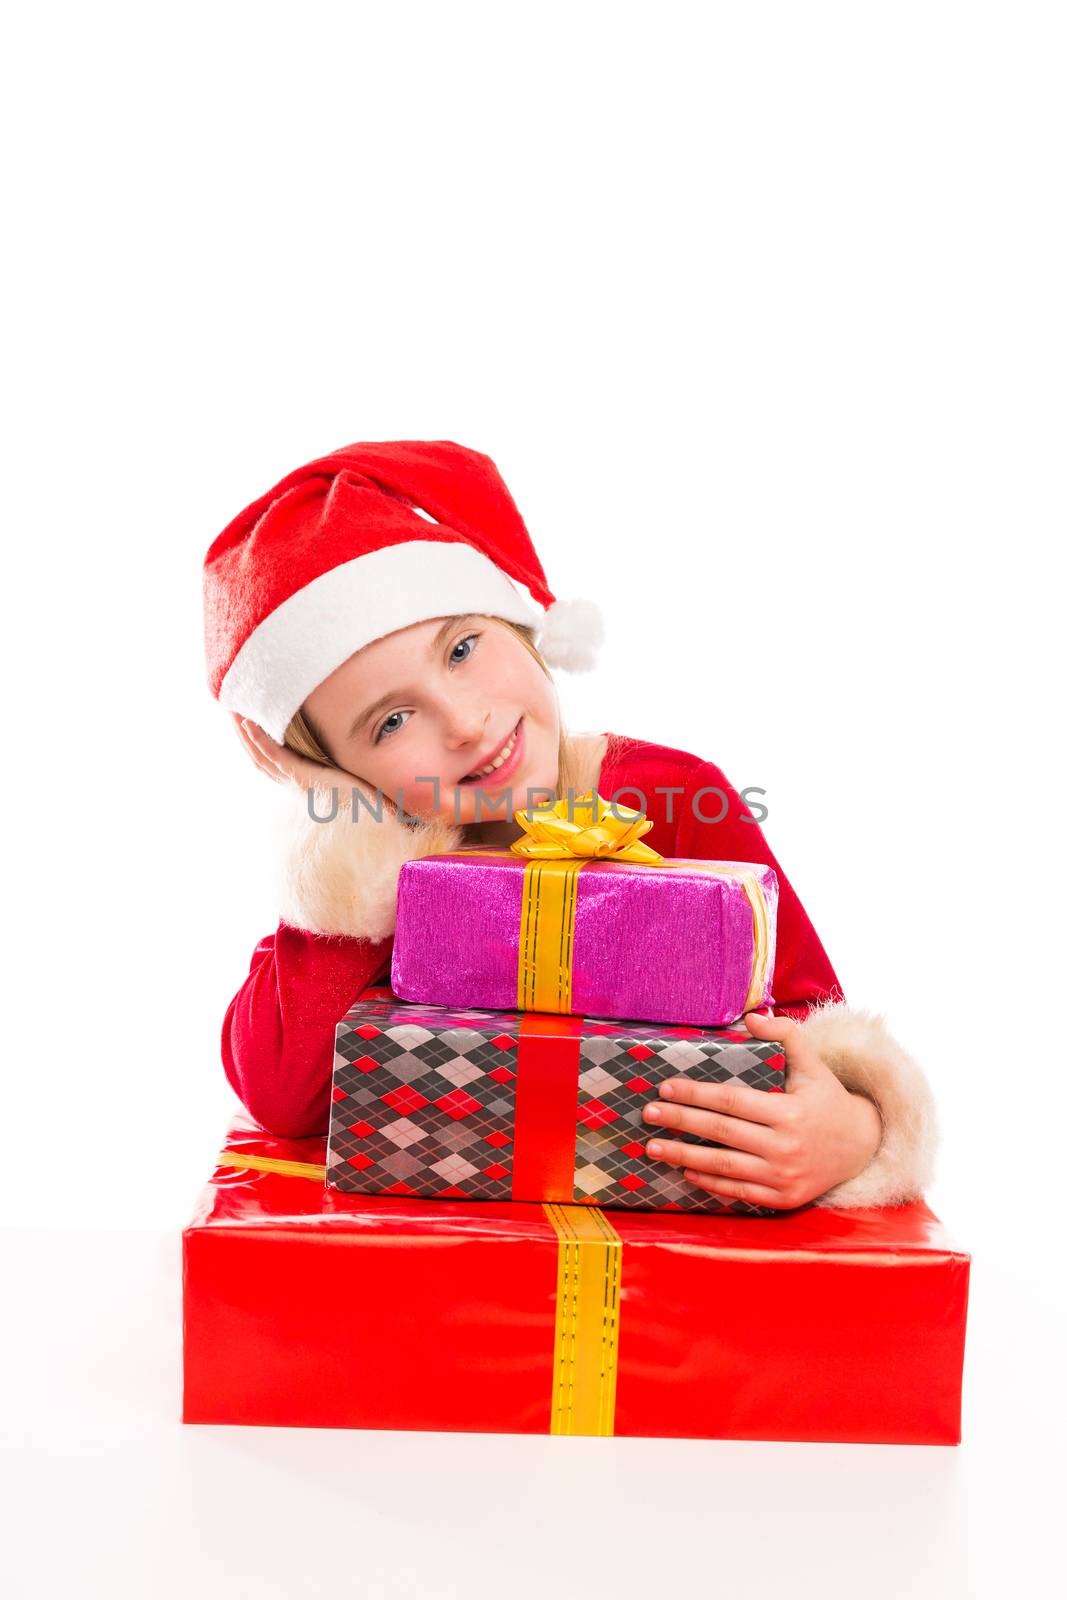 Christmas Santa kid girl happy excited with ribbon gifts by lunamarina